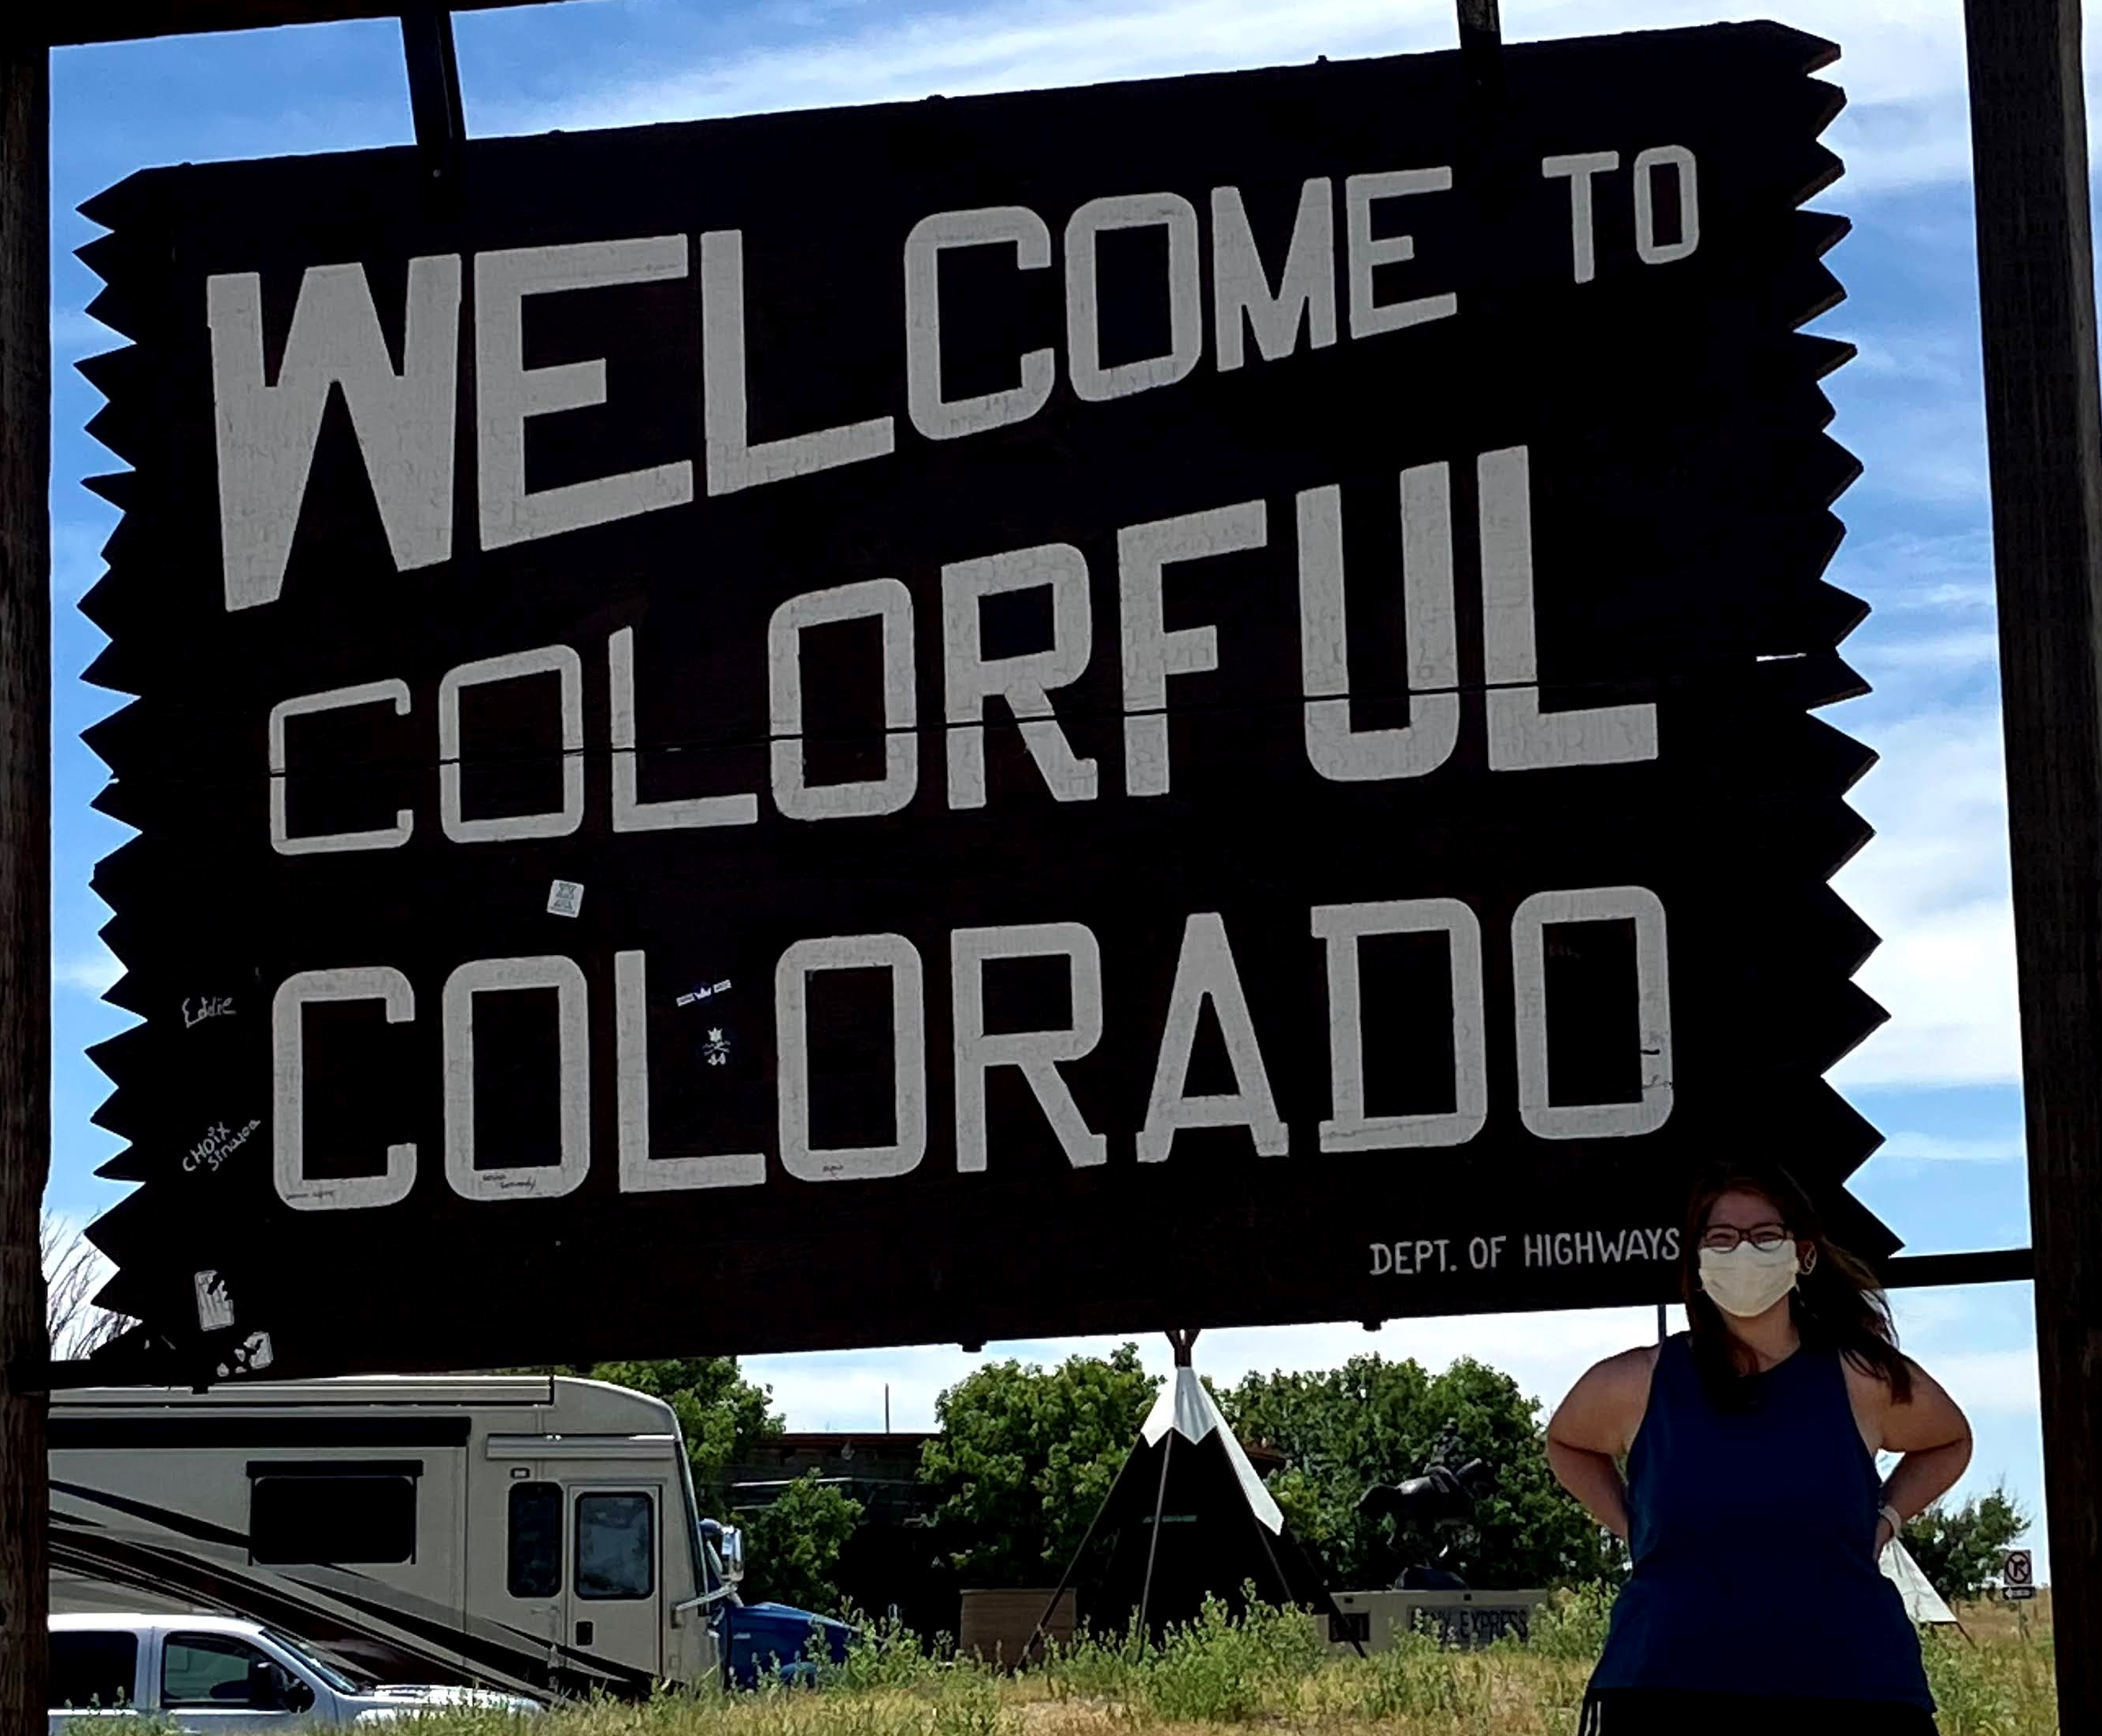 Image of  a person wearing a mask standing in front of  a sign that reads Welcome to Colorful Coloradoo